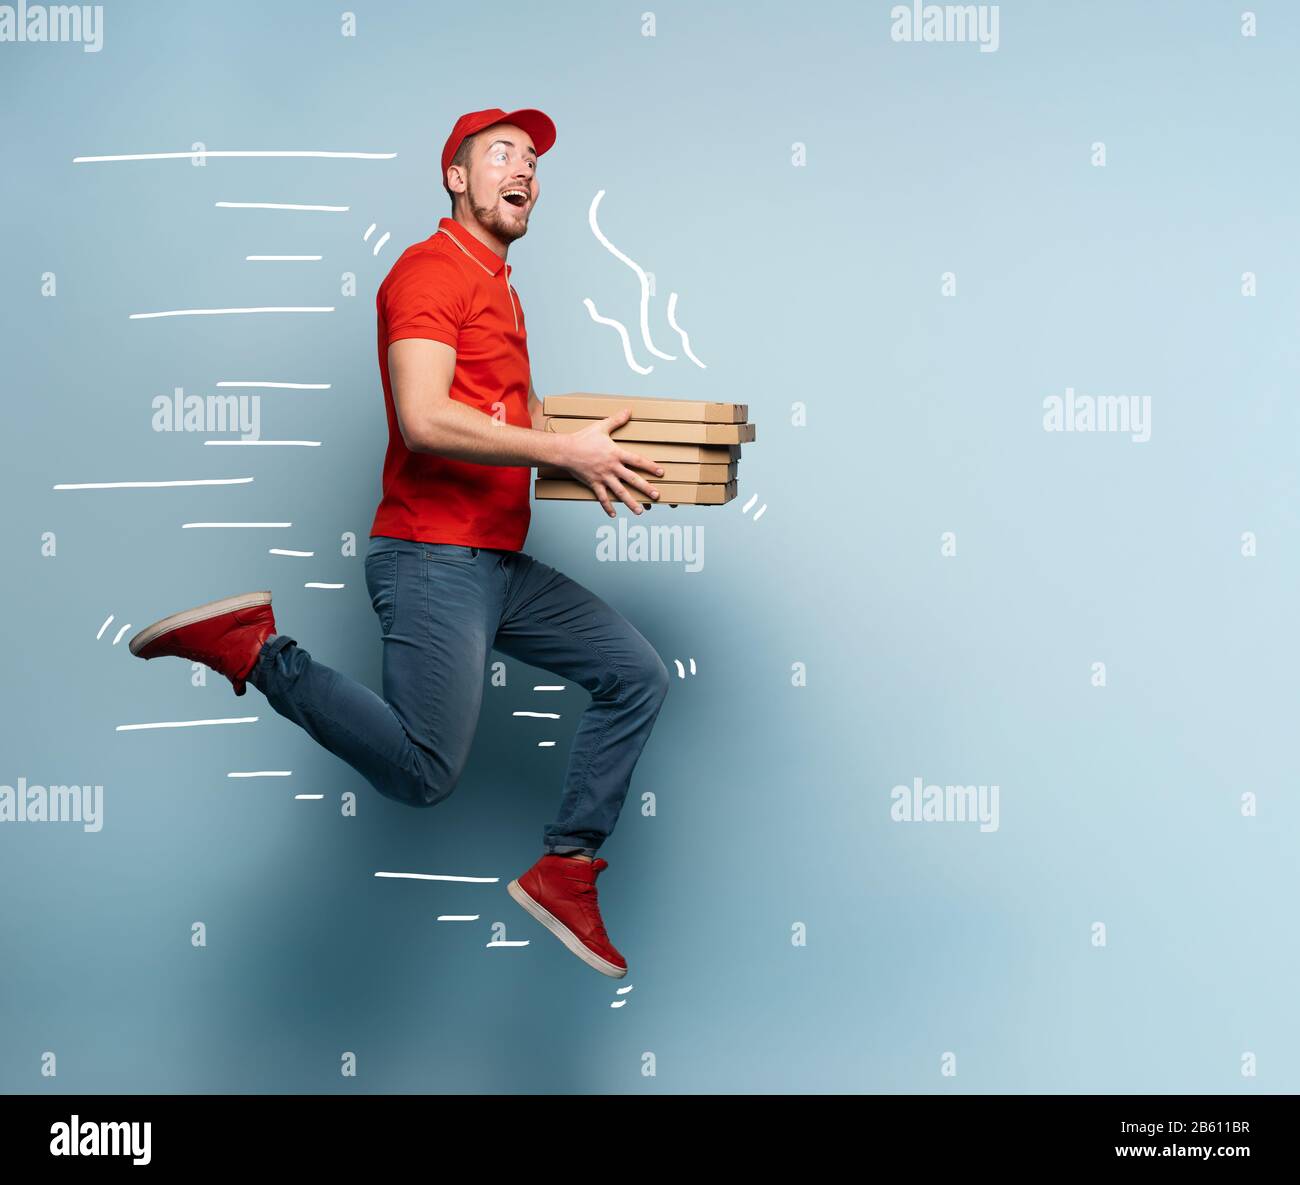 Courier runs fast to deliver quickly pizzas. Cyan background Stock Photo